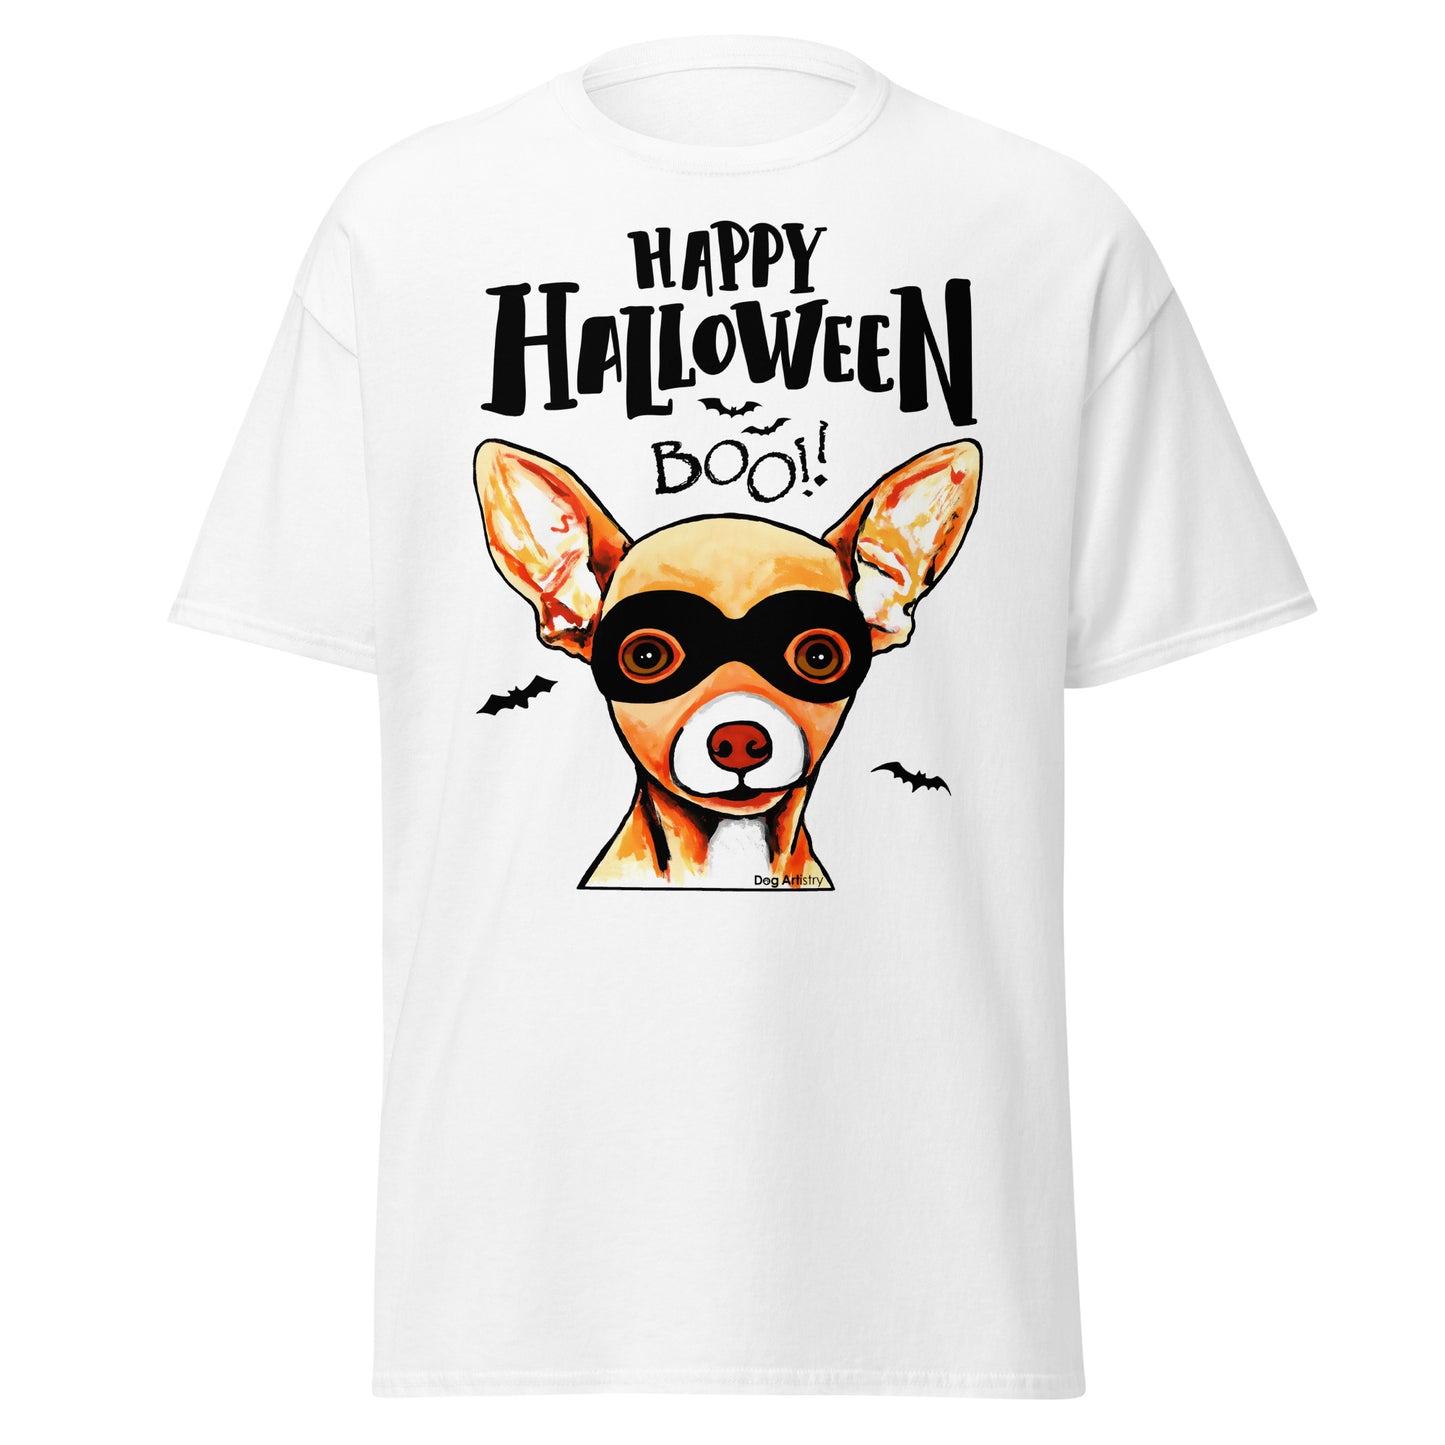 Funny Happy Halloween Chihuahua wearing mask men’s white t-shirt by Dog Artistry.